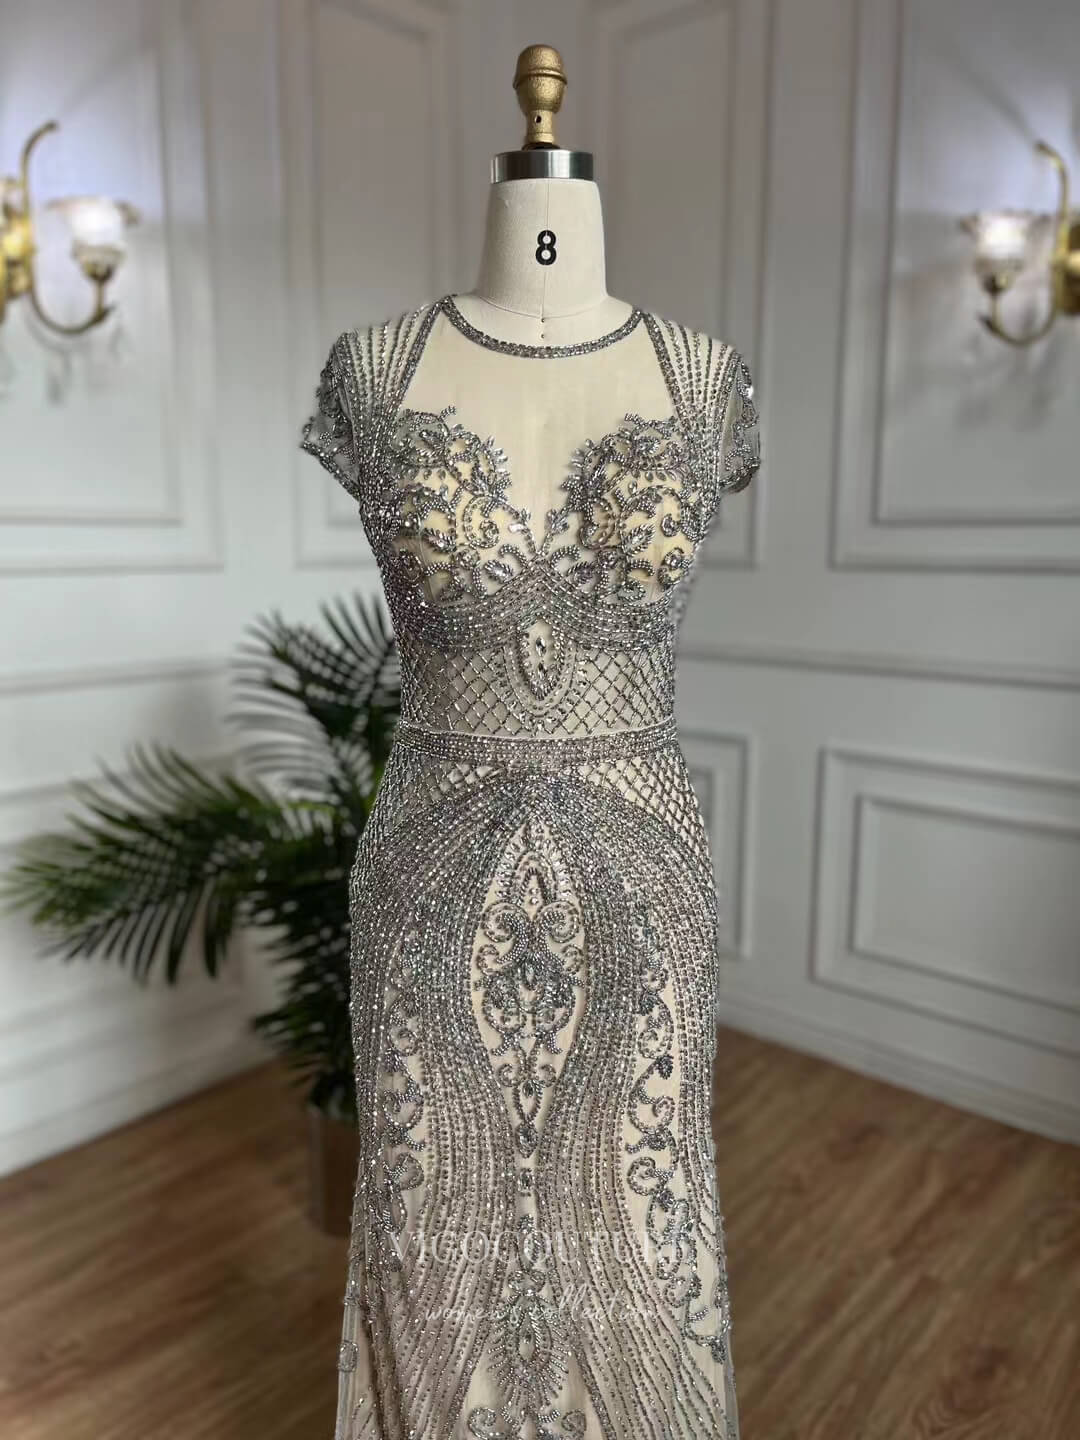 Silver Beaded Lace Prom Dresses Cap Sleeve 1920s Evening Dress 22126-Prom Dresses-vigocouture-Silver-US2-vigocouture